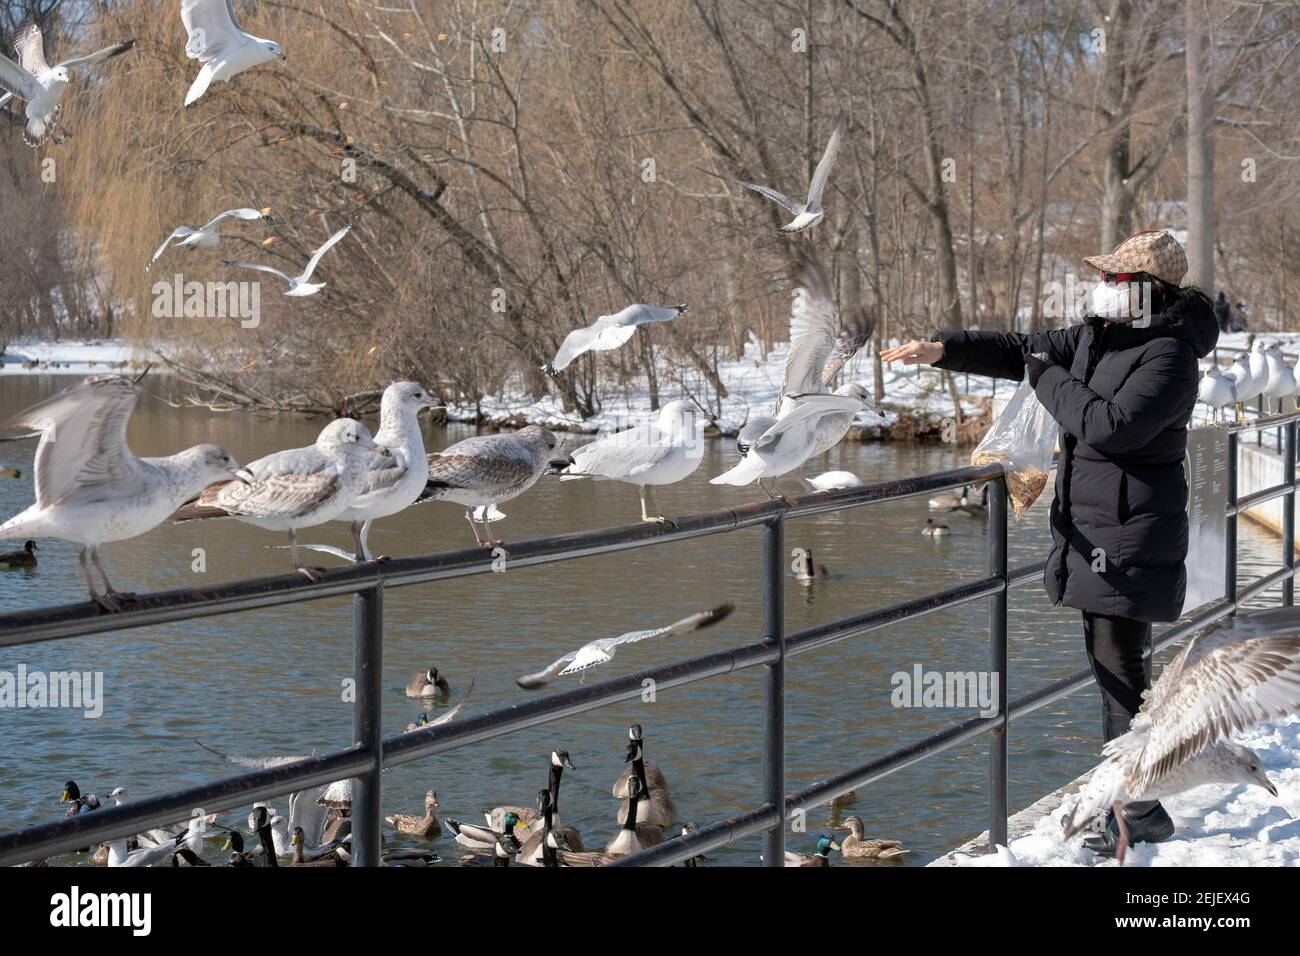 An unidentifiable asian American woman feeds pieces of bread to sea gulls and ducks at the lake in Kissena Park, Flushing, Queens, NYC. Stock Photo